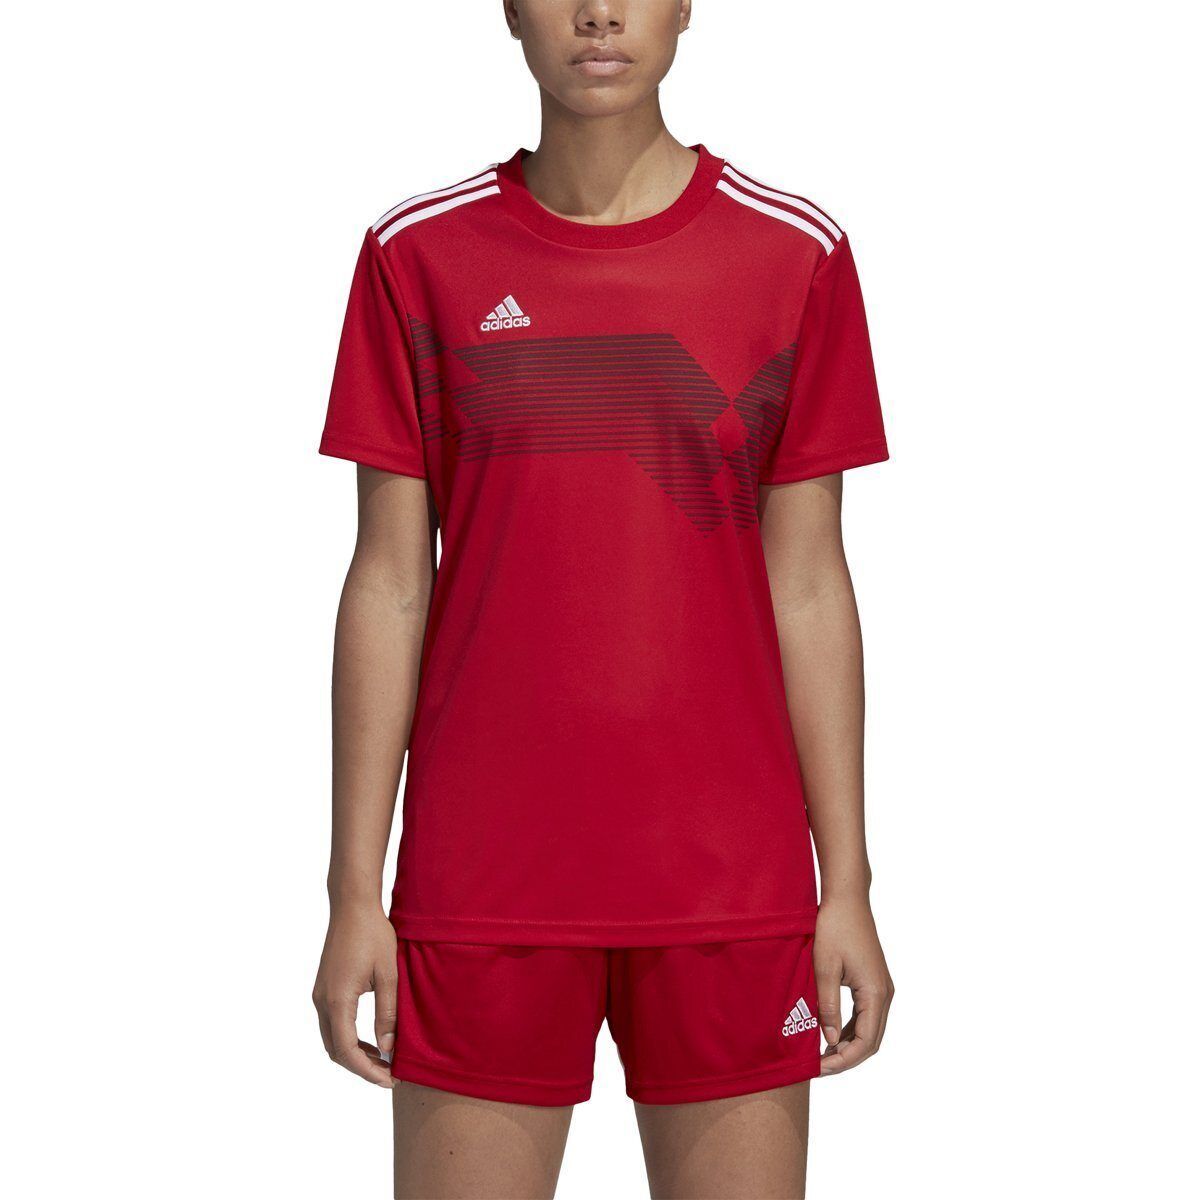 Primary image for adidas Womens Campeon 19 Jersey,Red/White,Large